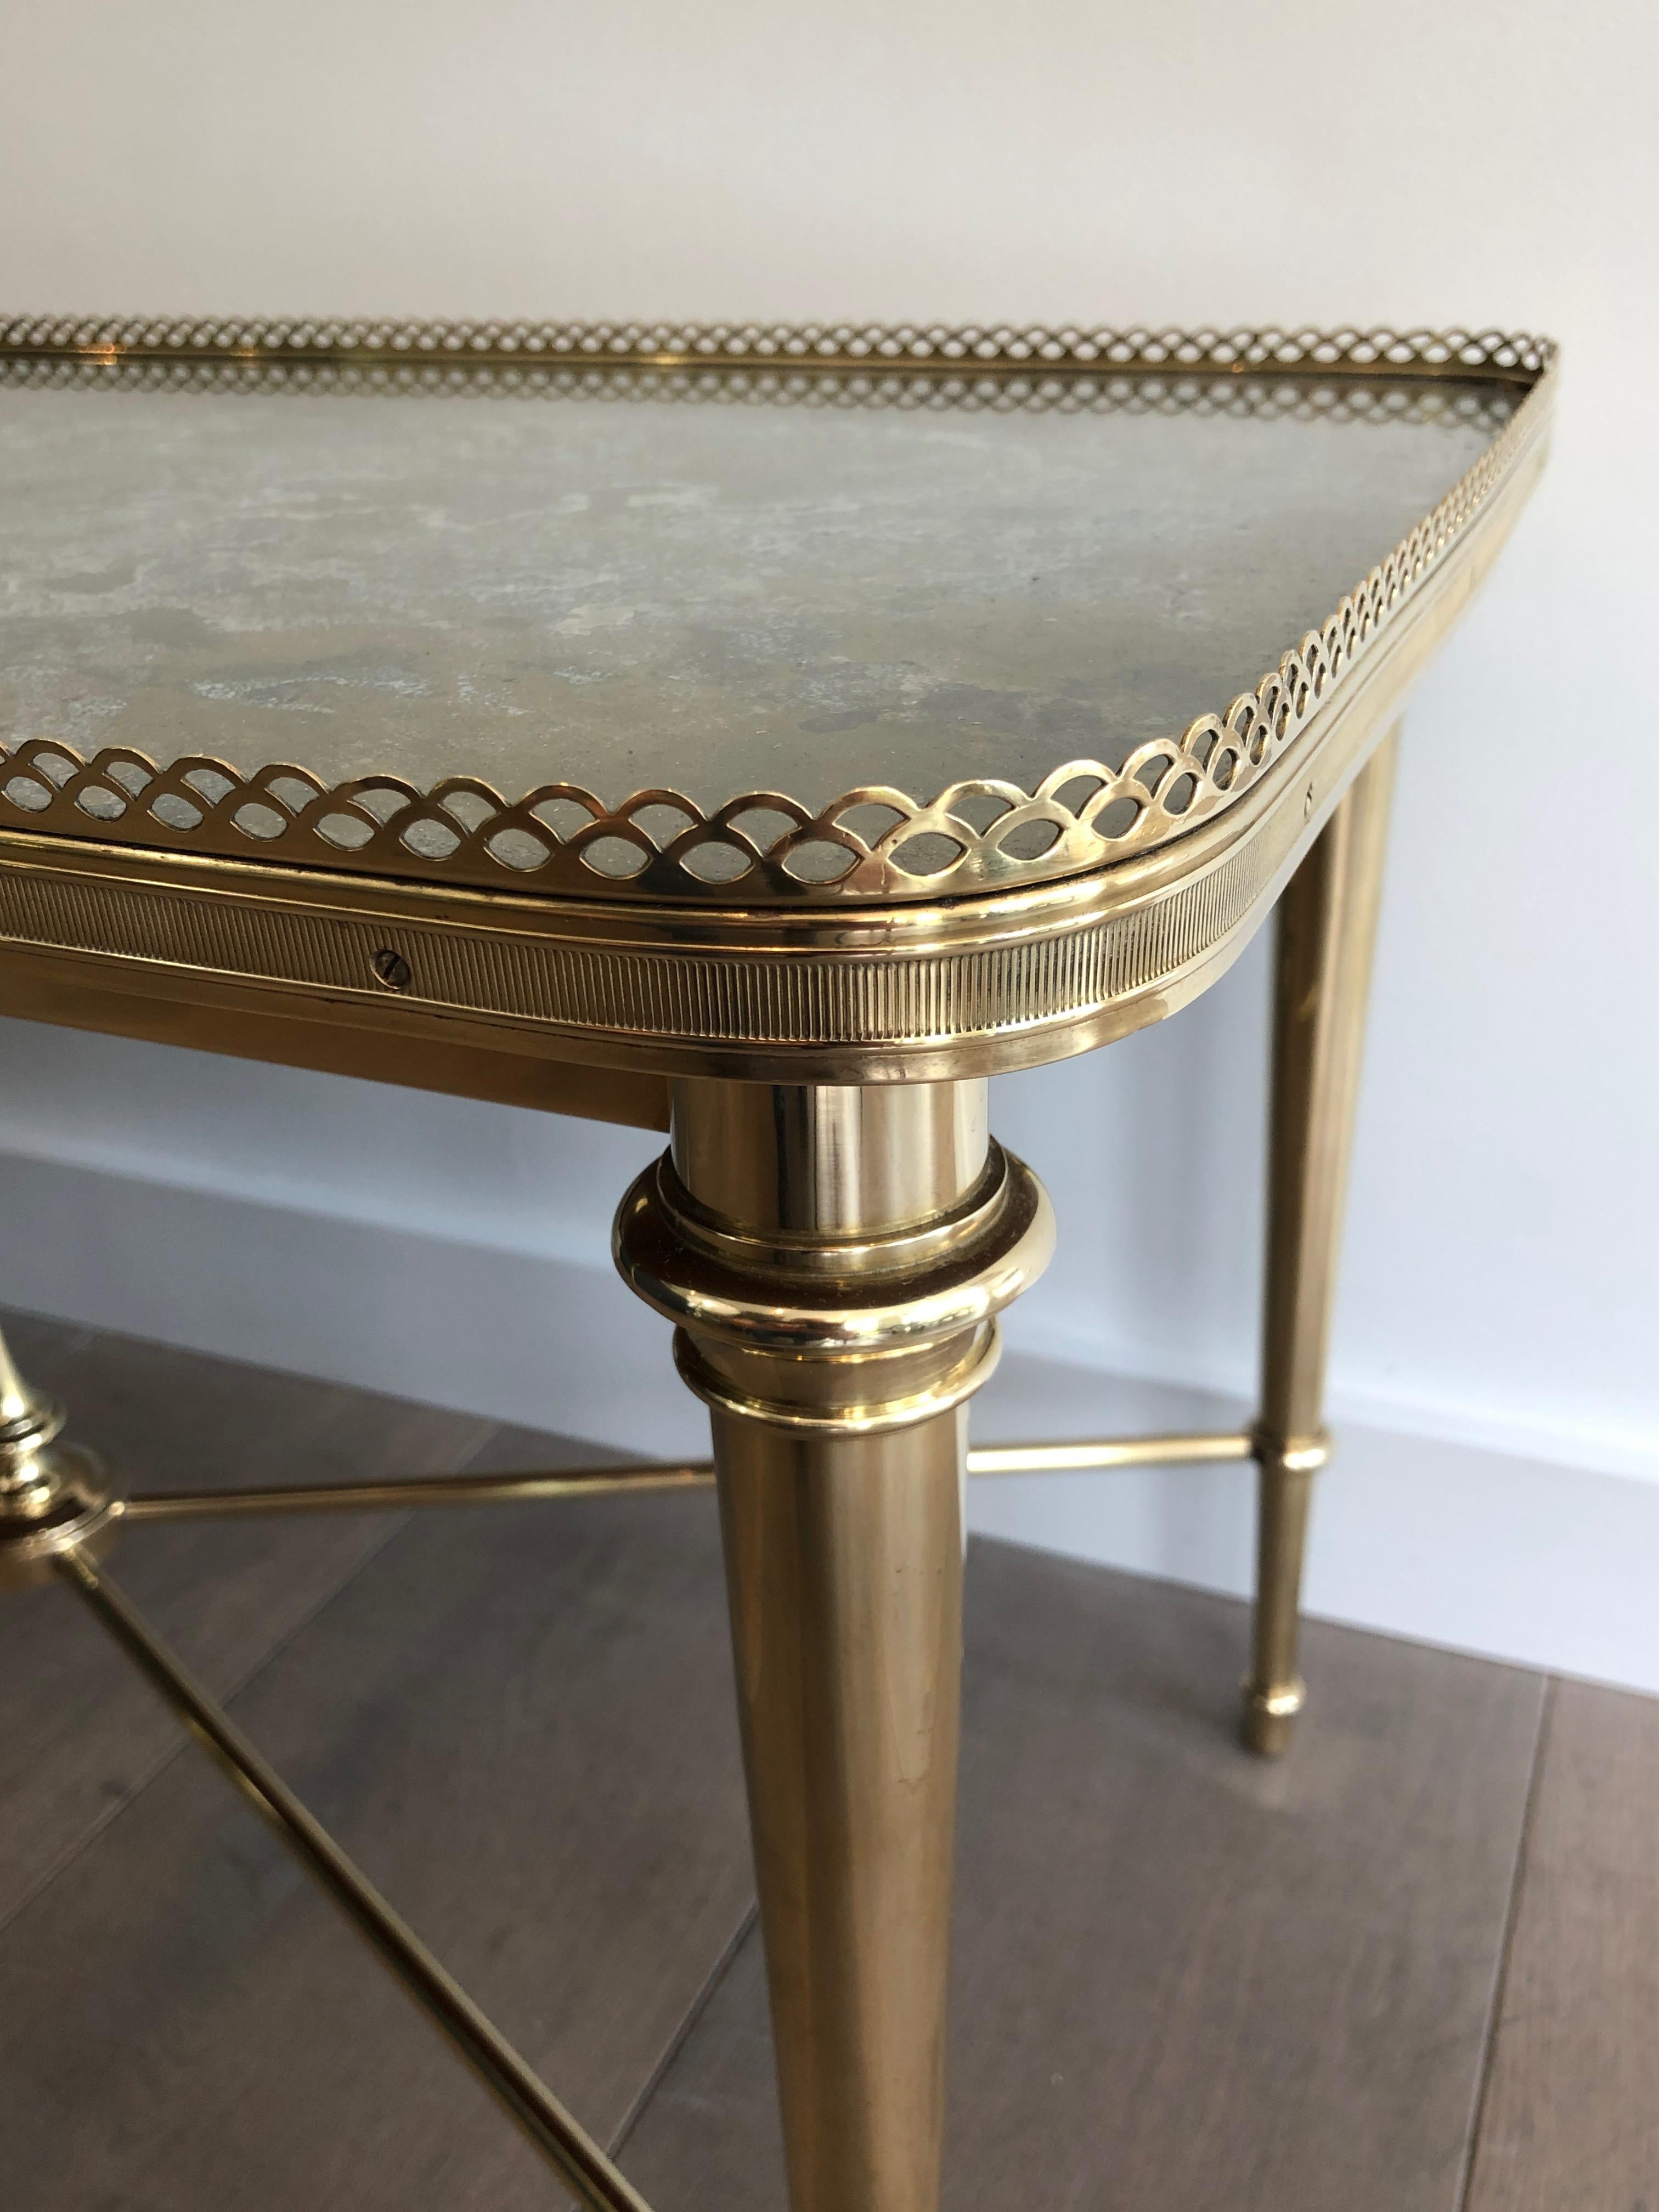 Mid-20th Century Brass Coffee Table with Oxidized Brass Top by Maison Ramsay For Sale